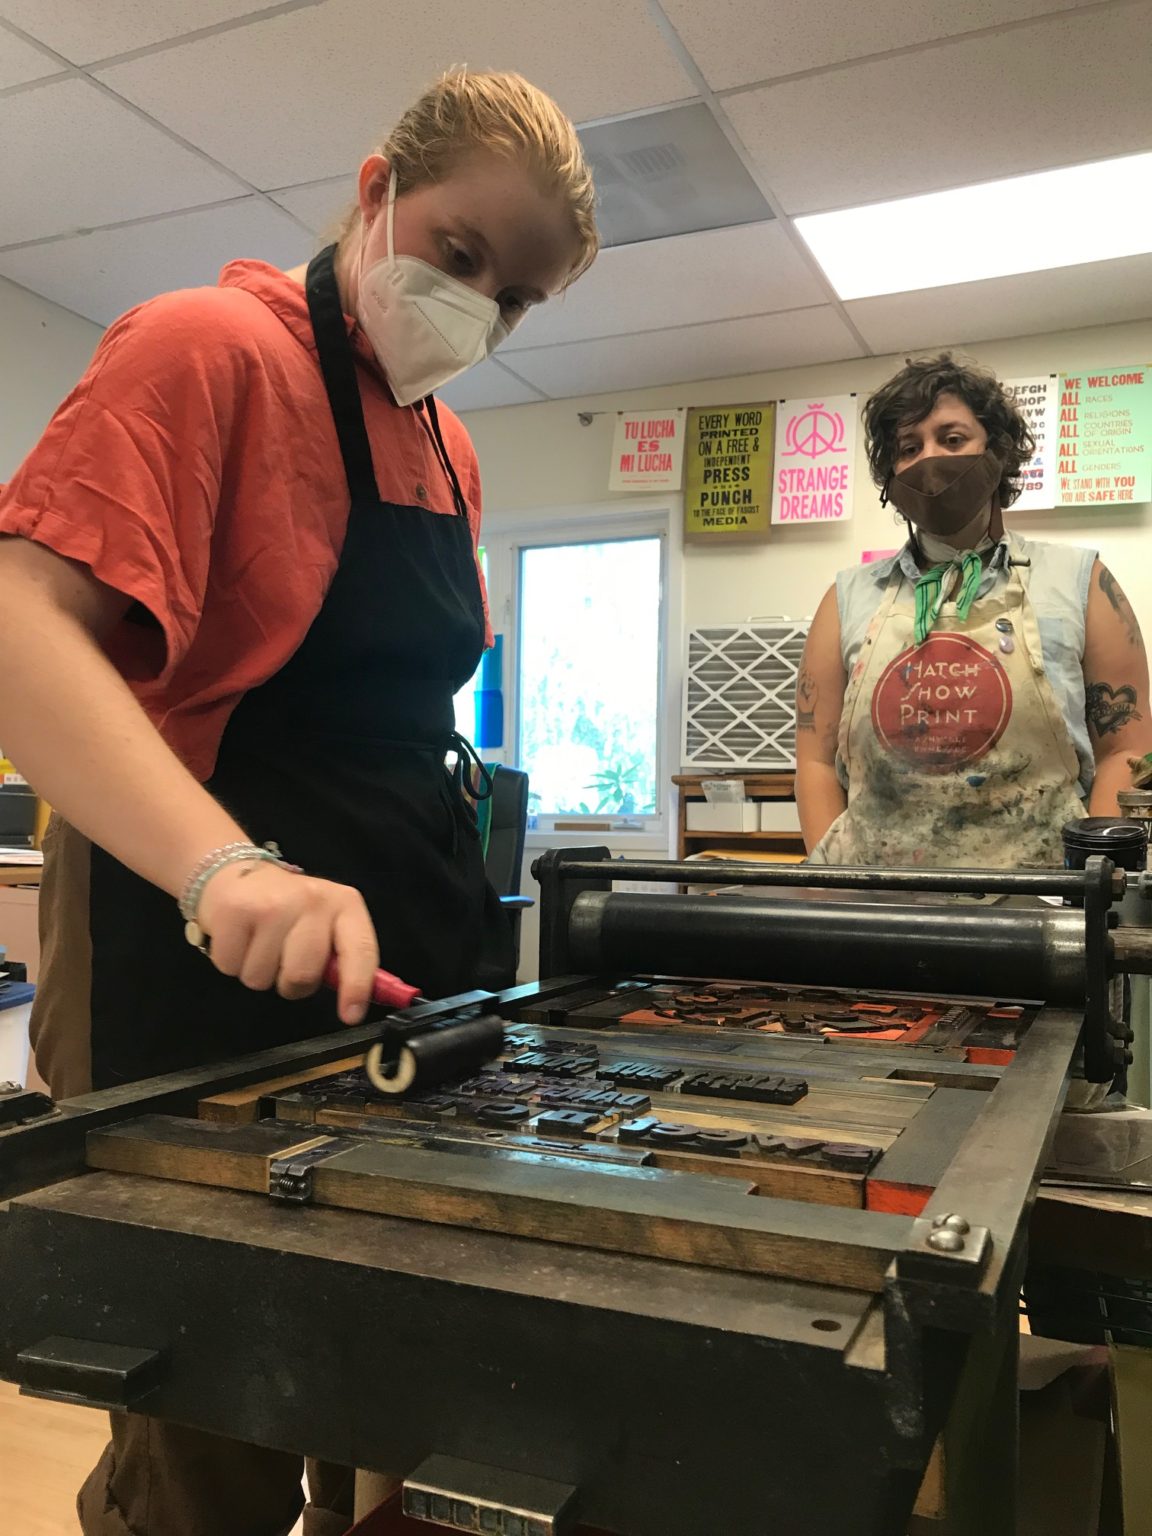 Instructor using letter press while student watches